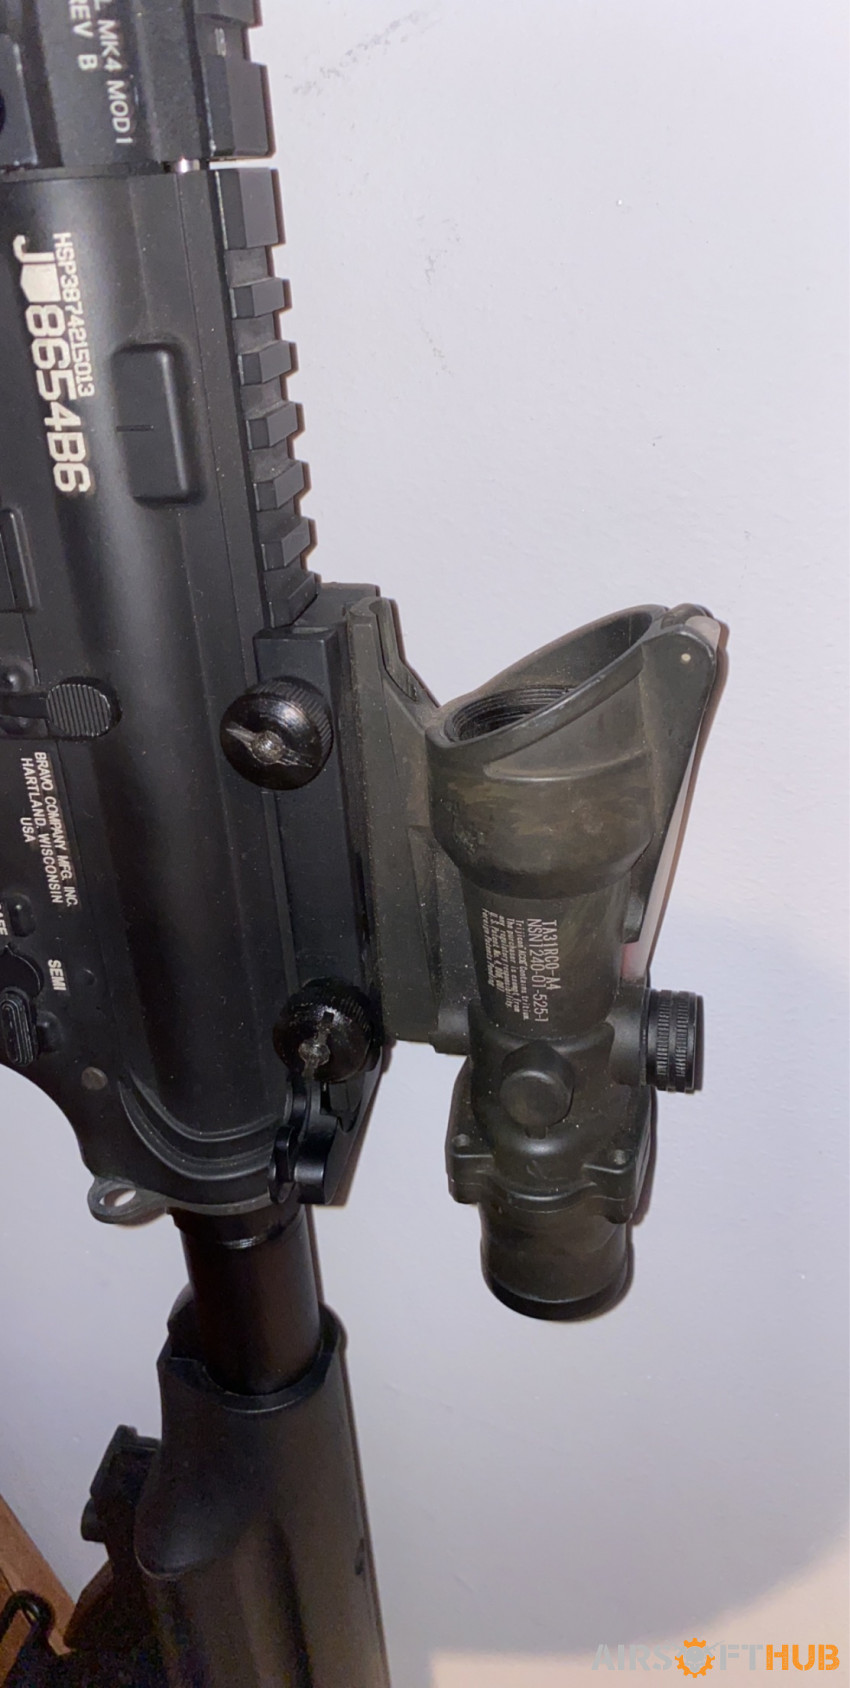 BCM M4(fully metal) - Used airsoft equipment